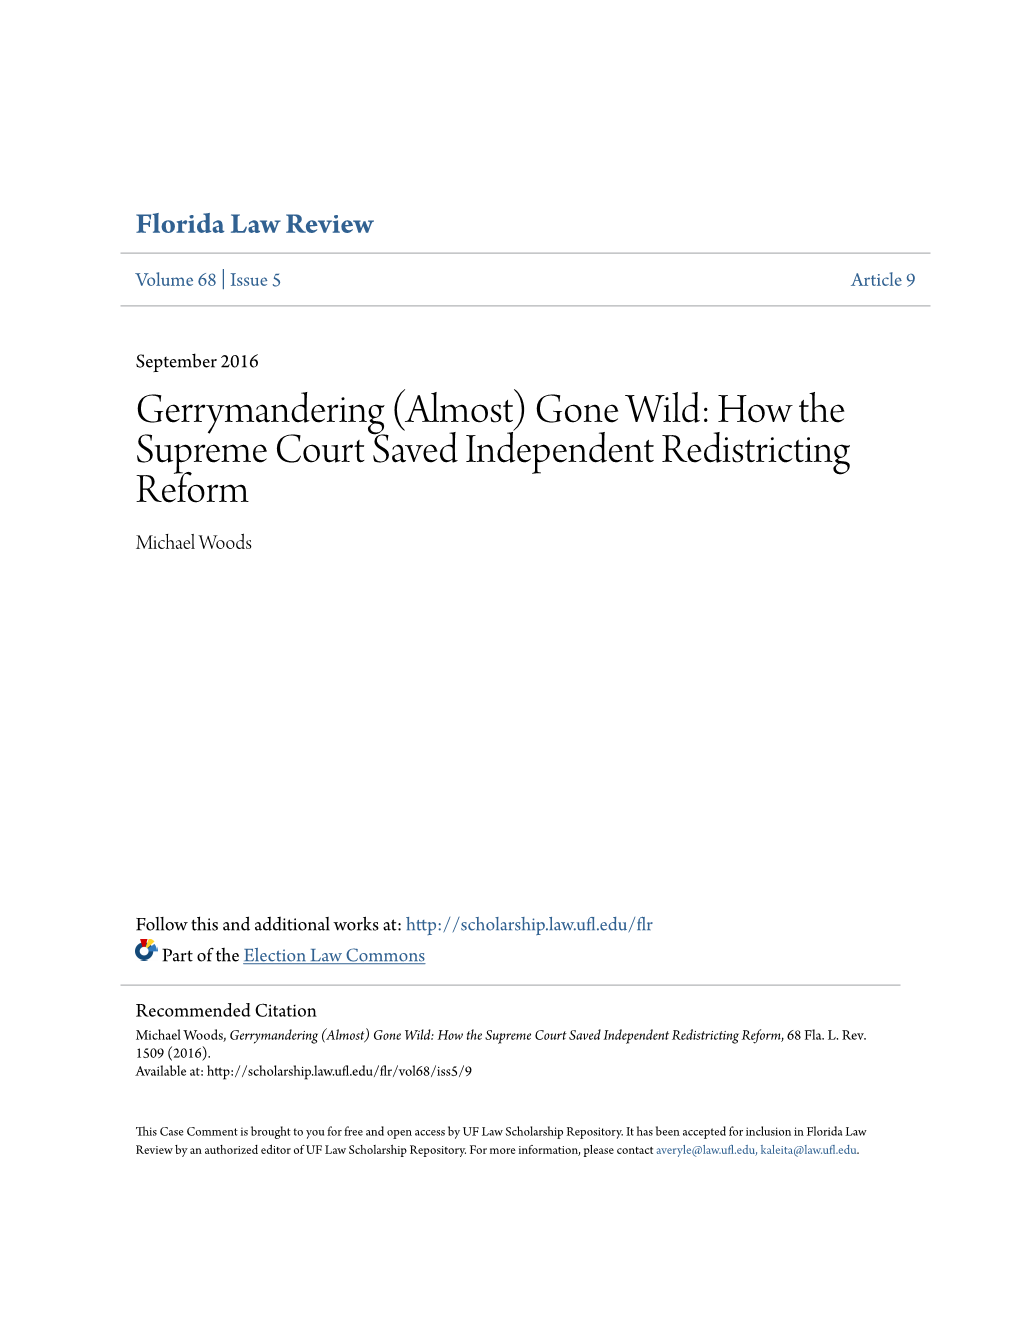 Gerrymandering (Almost) Gone Wild: How the Supreme Court Saved Independent Redistricting Reform Michael Woods